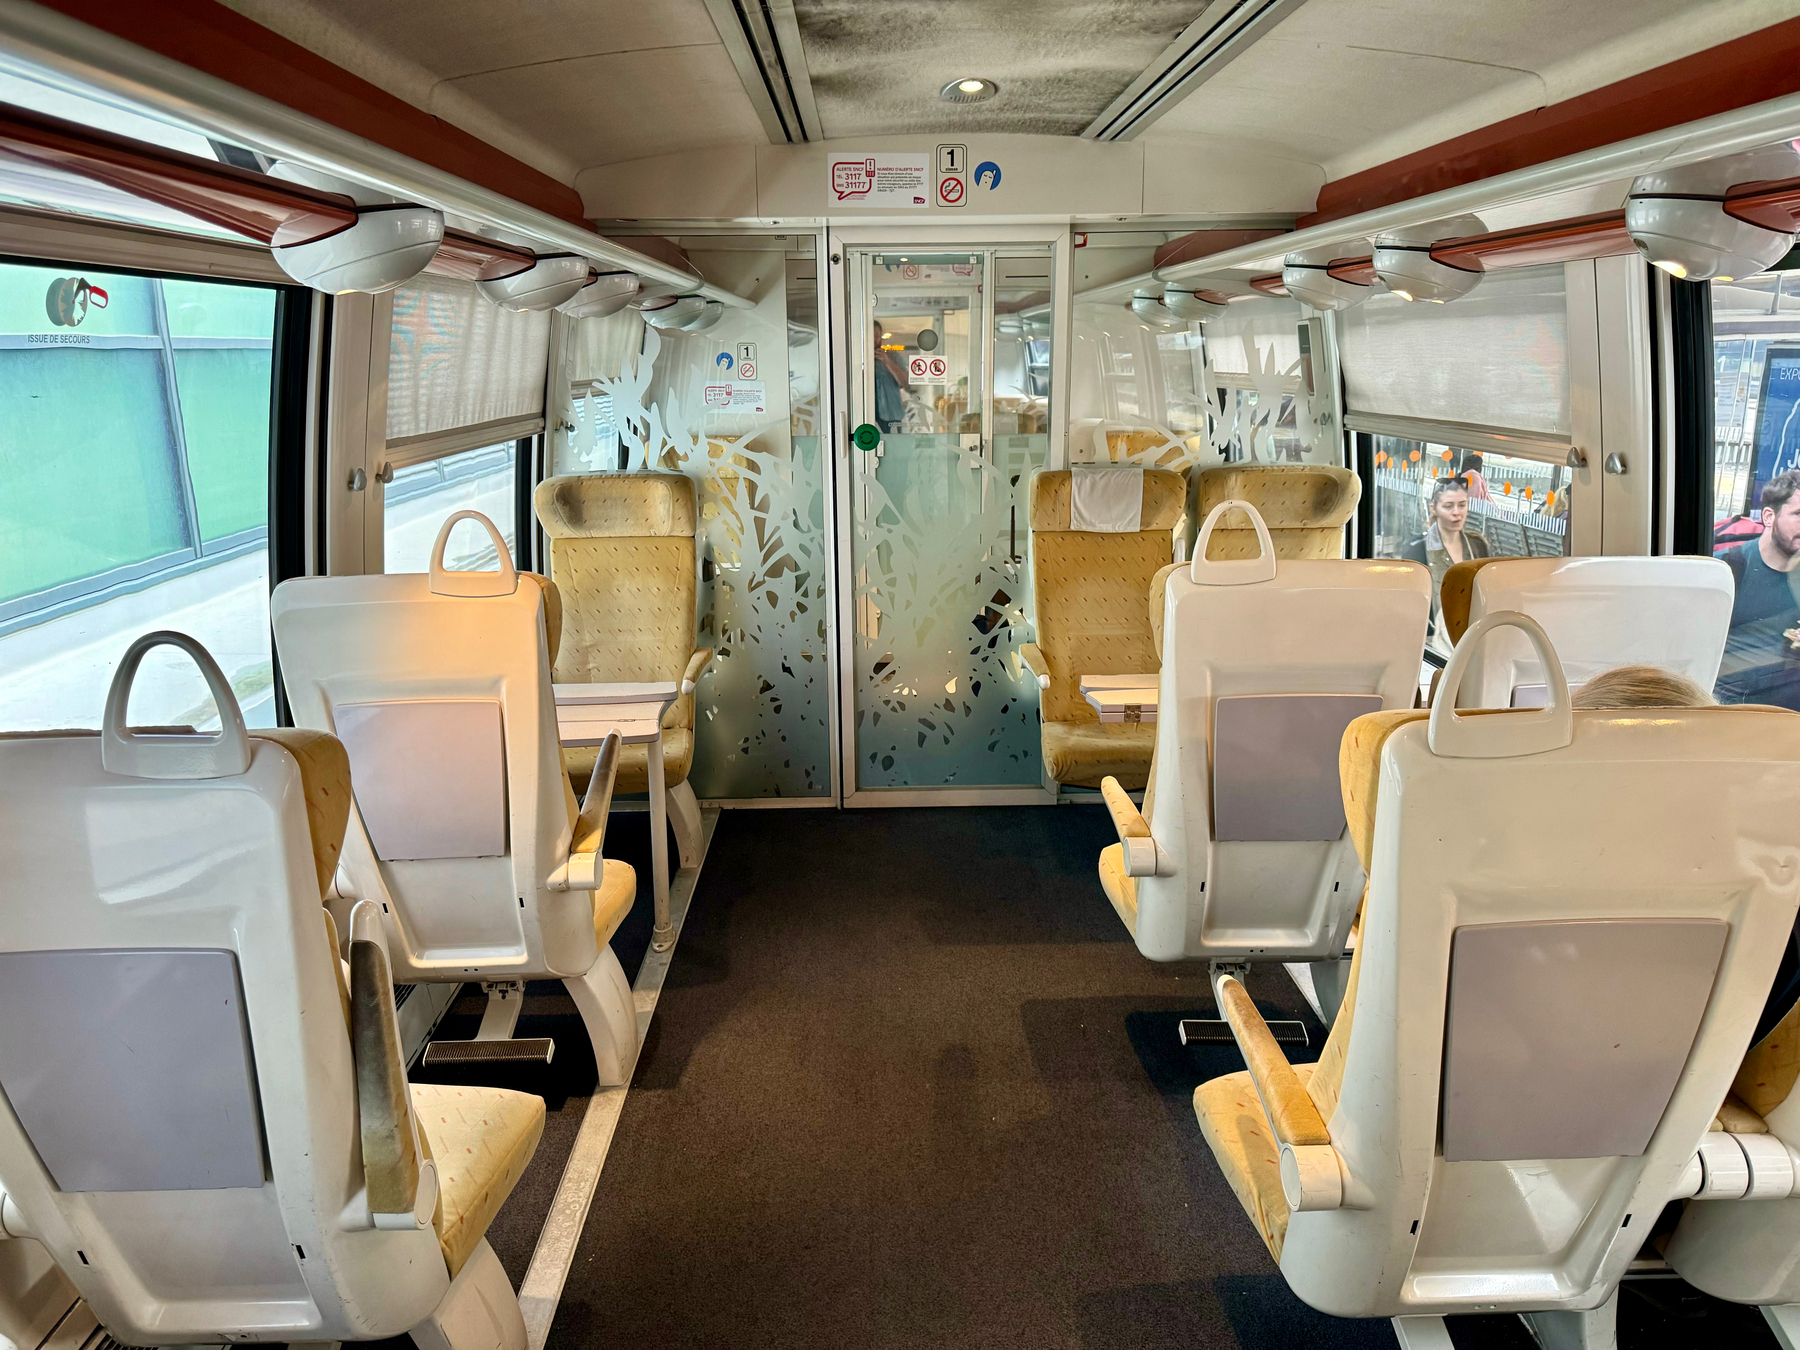 Interior of a train carriage with empty seats, patterned divider, overhead luggage compartments, and passengers seated further down.